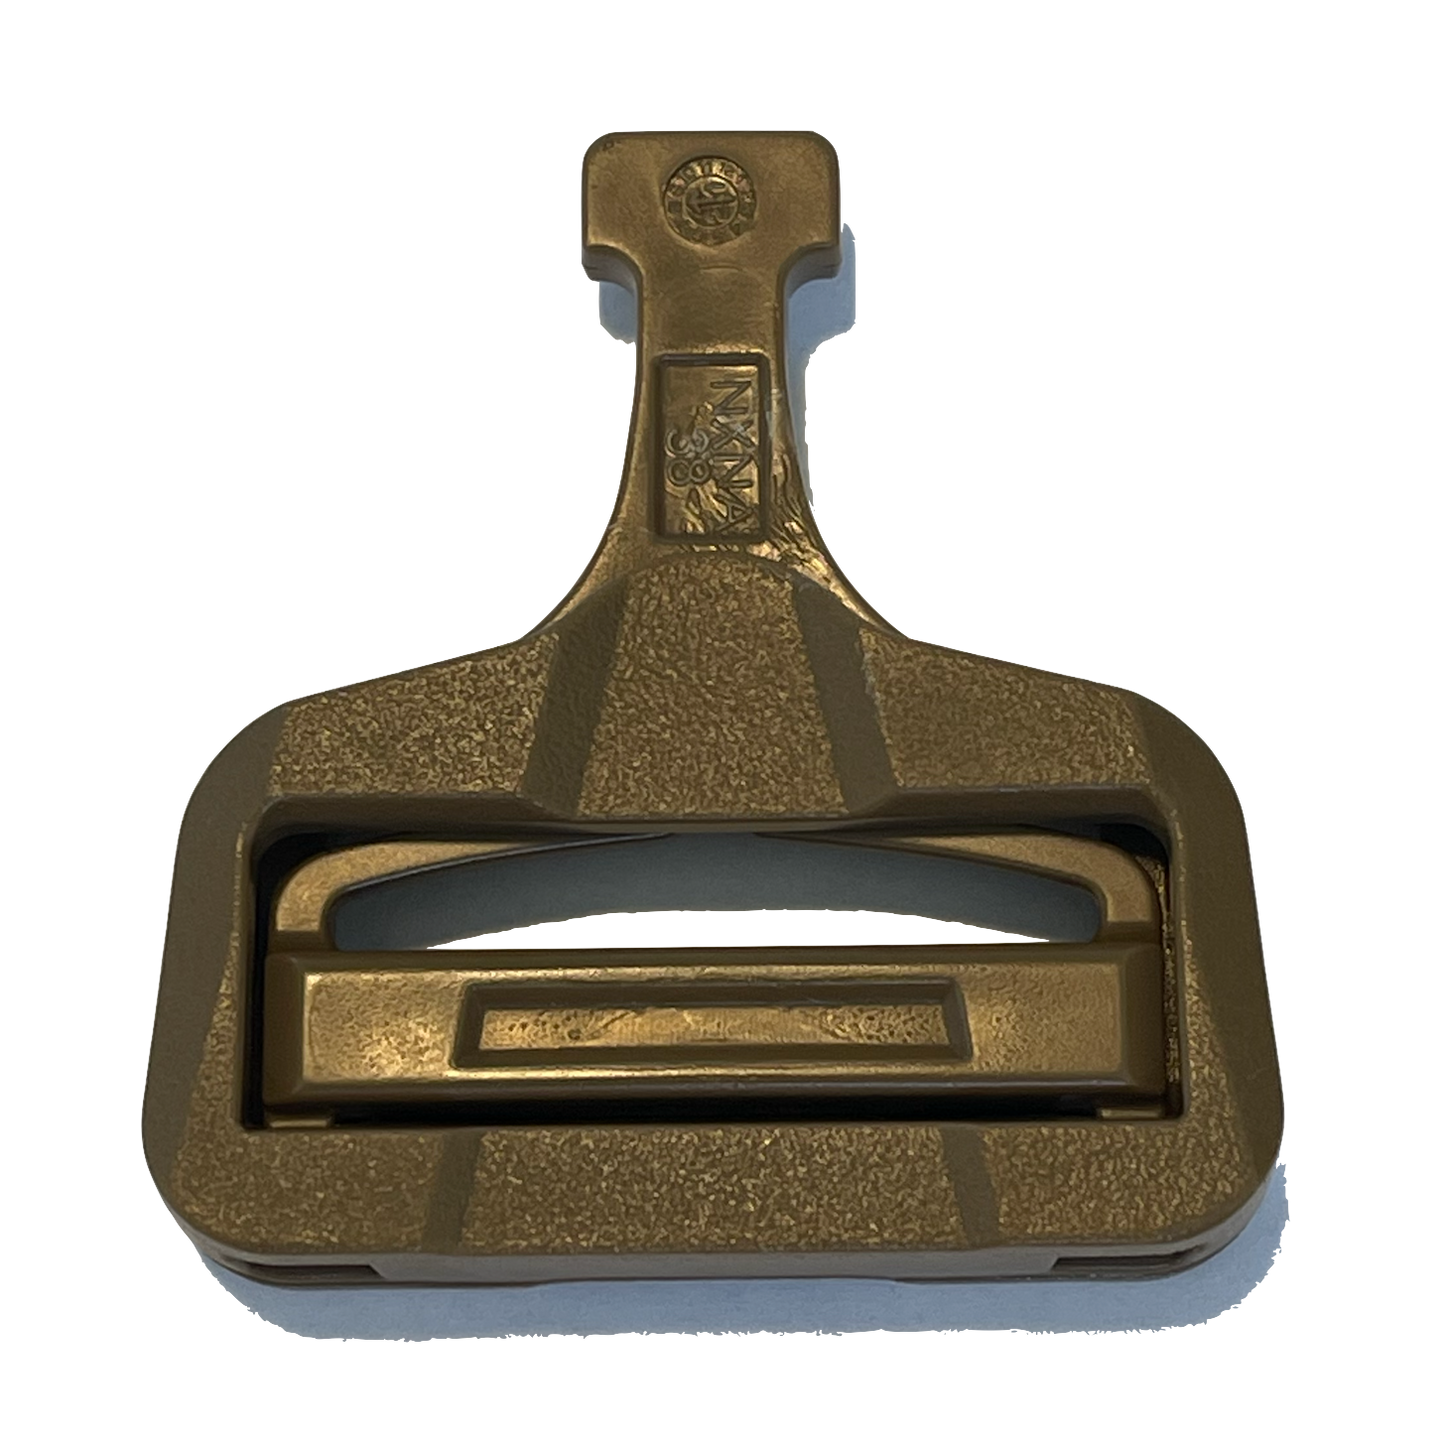 GT Cobra™ Latch & Housing - Multiple Widths (Sold Separately)